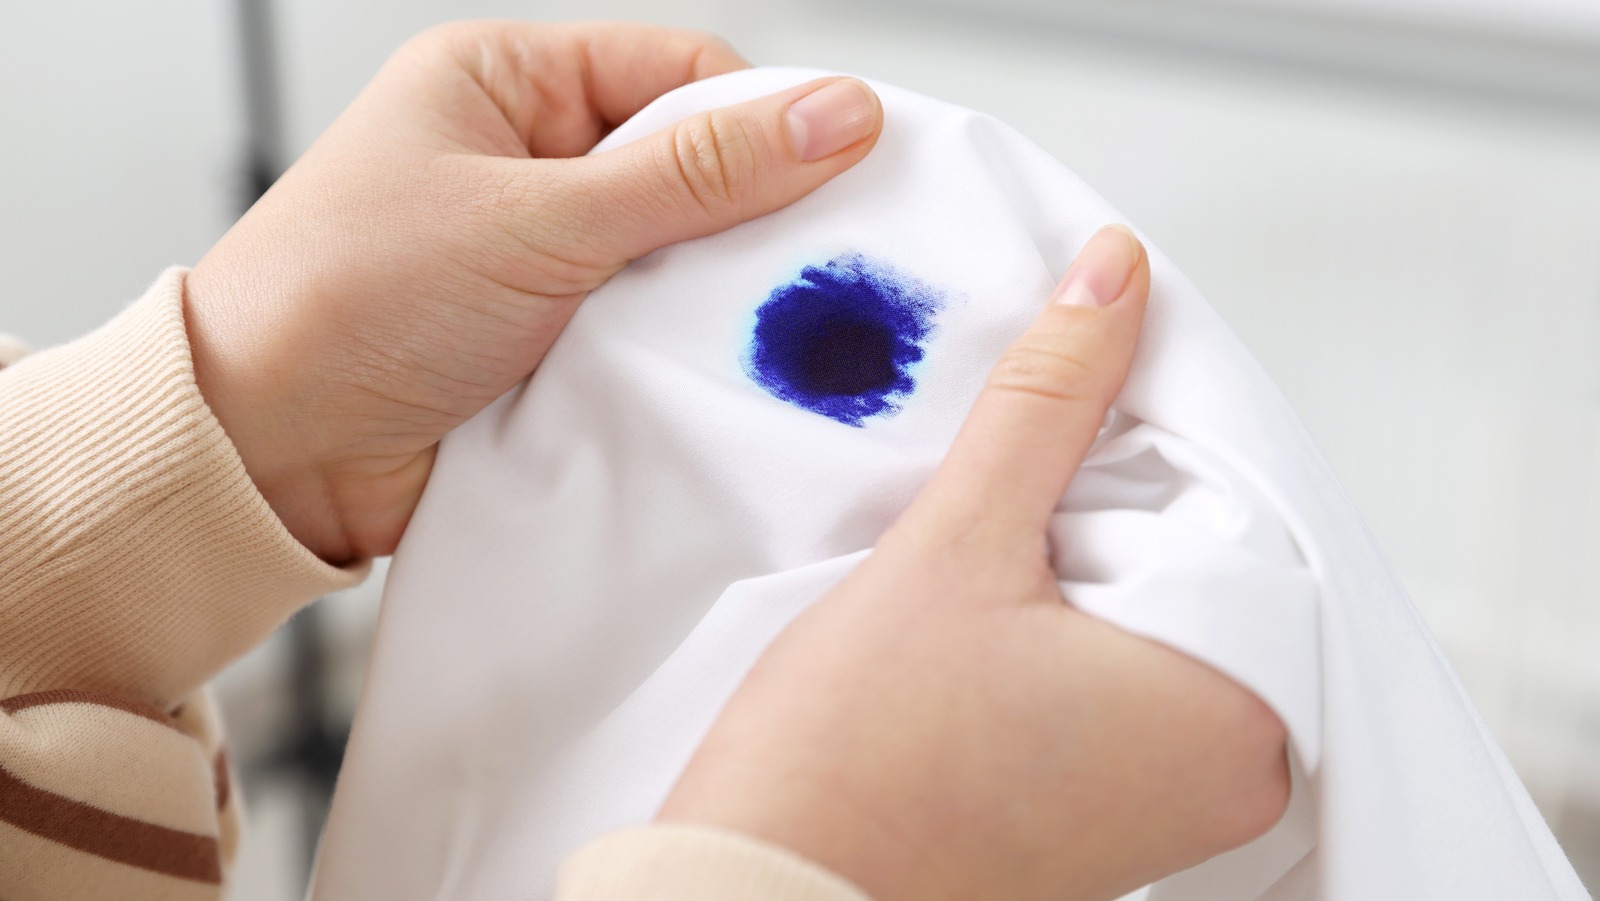 How To Get Ink Out of Clothes, Including Permanent Ink